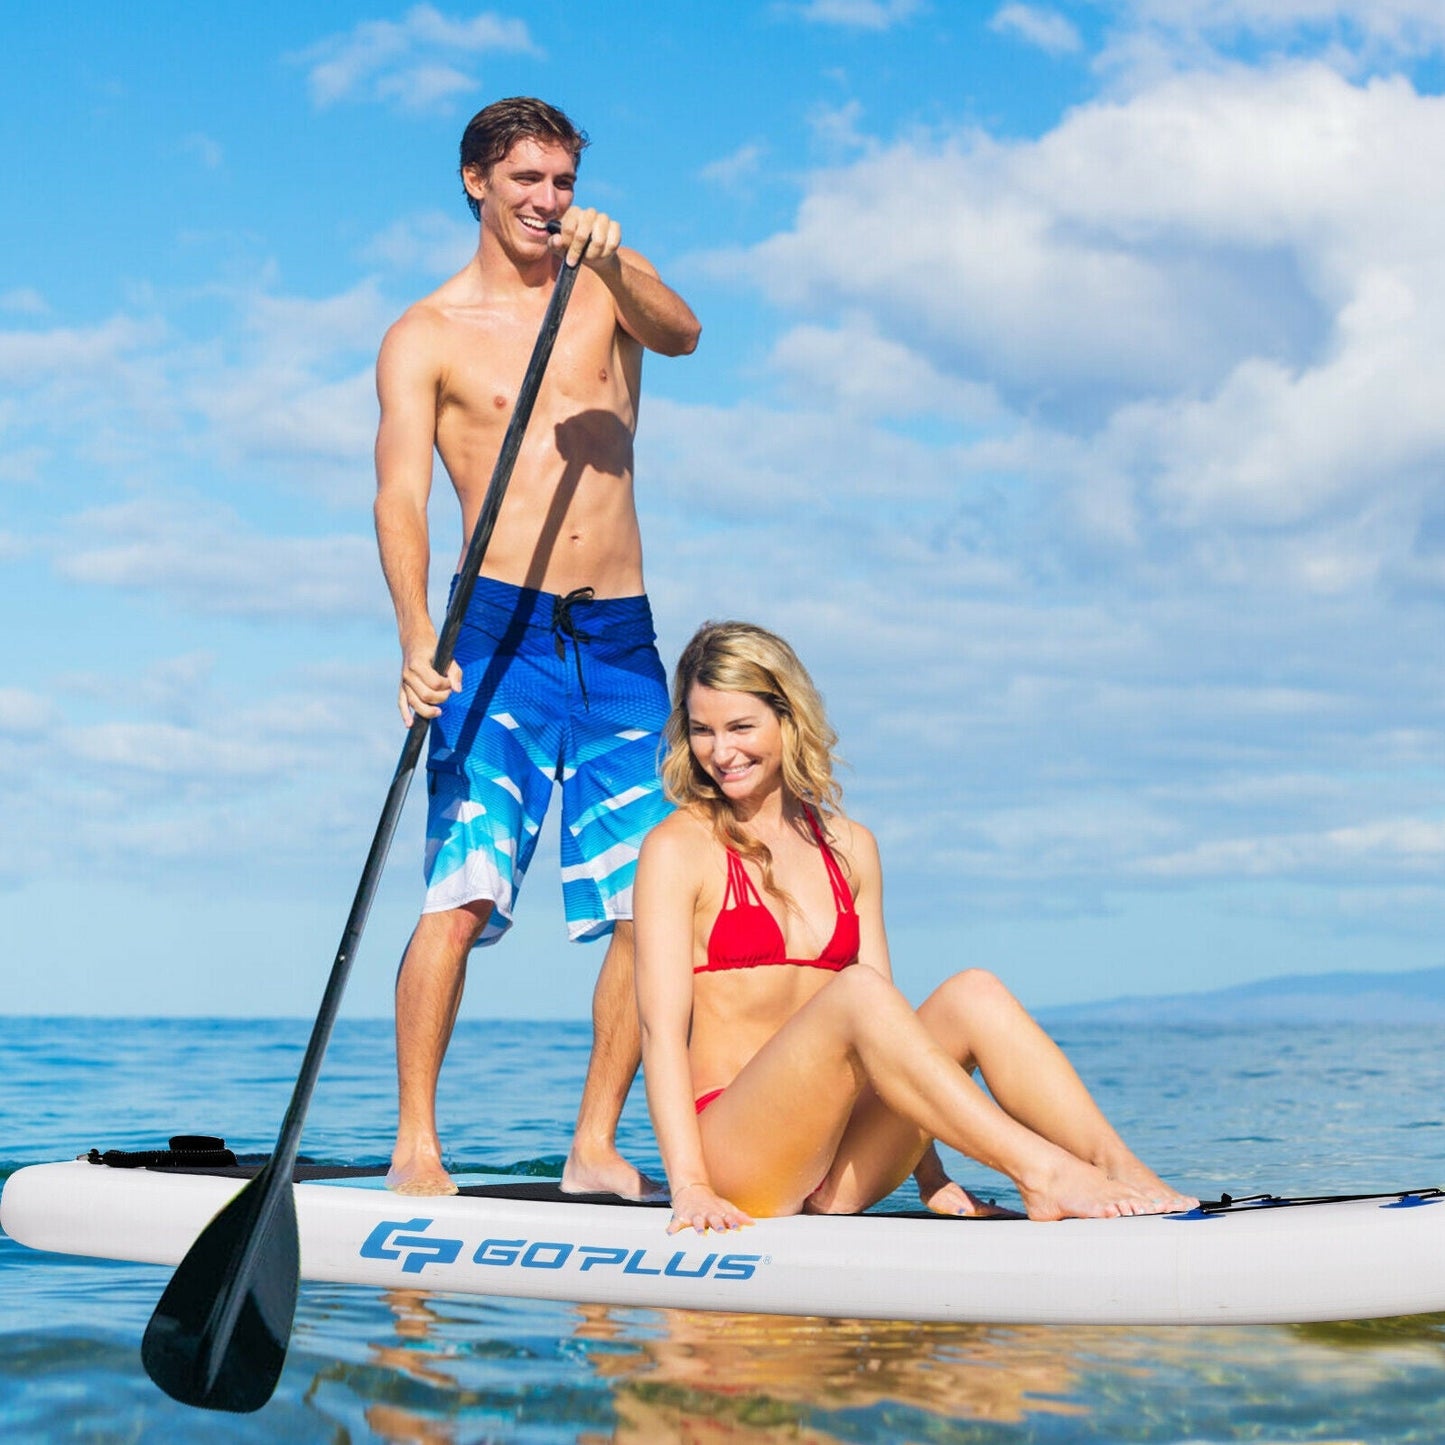 10 Feet Inflatable Stand Up Paddle Board with Carry Bag - Gallery Canada